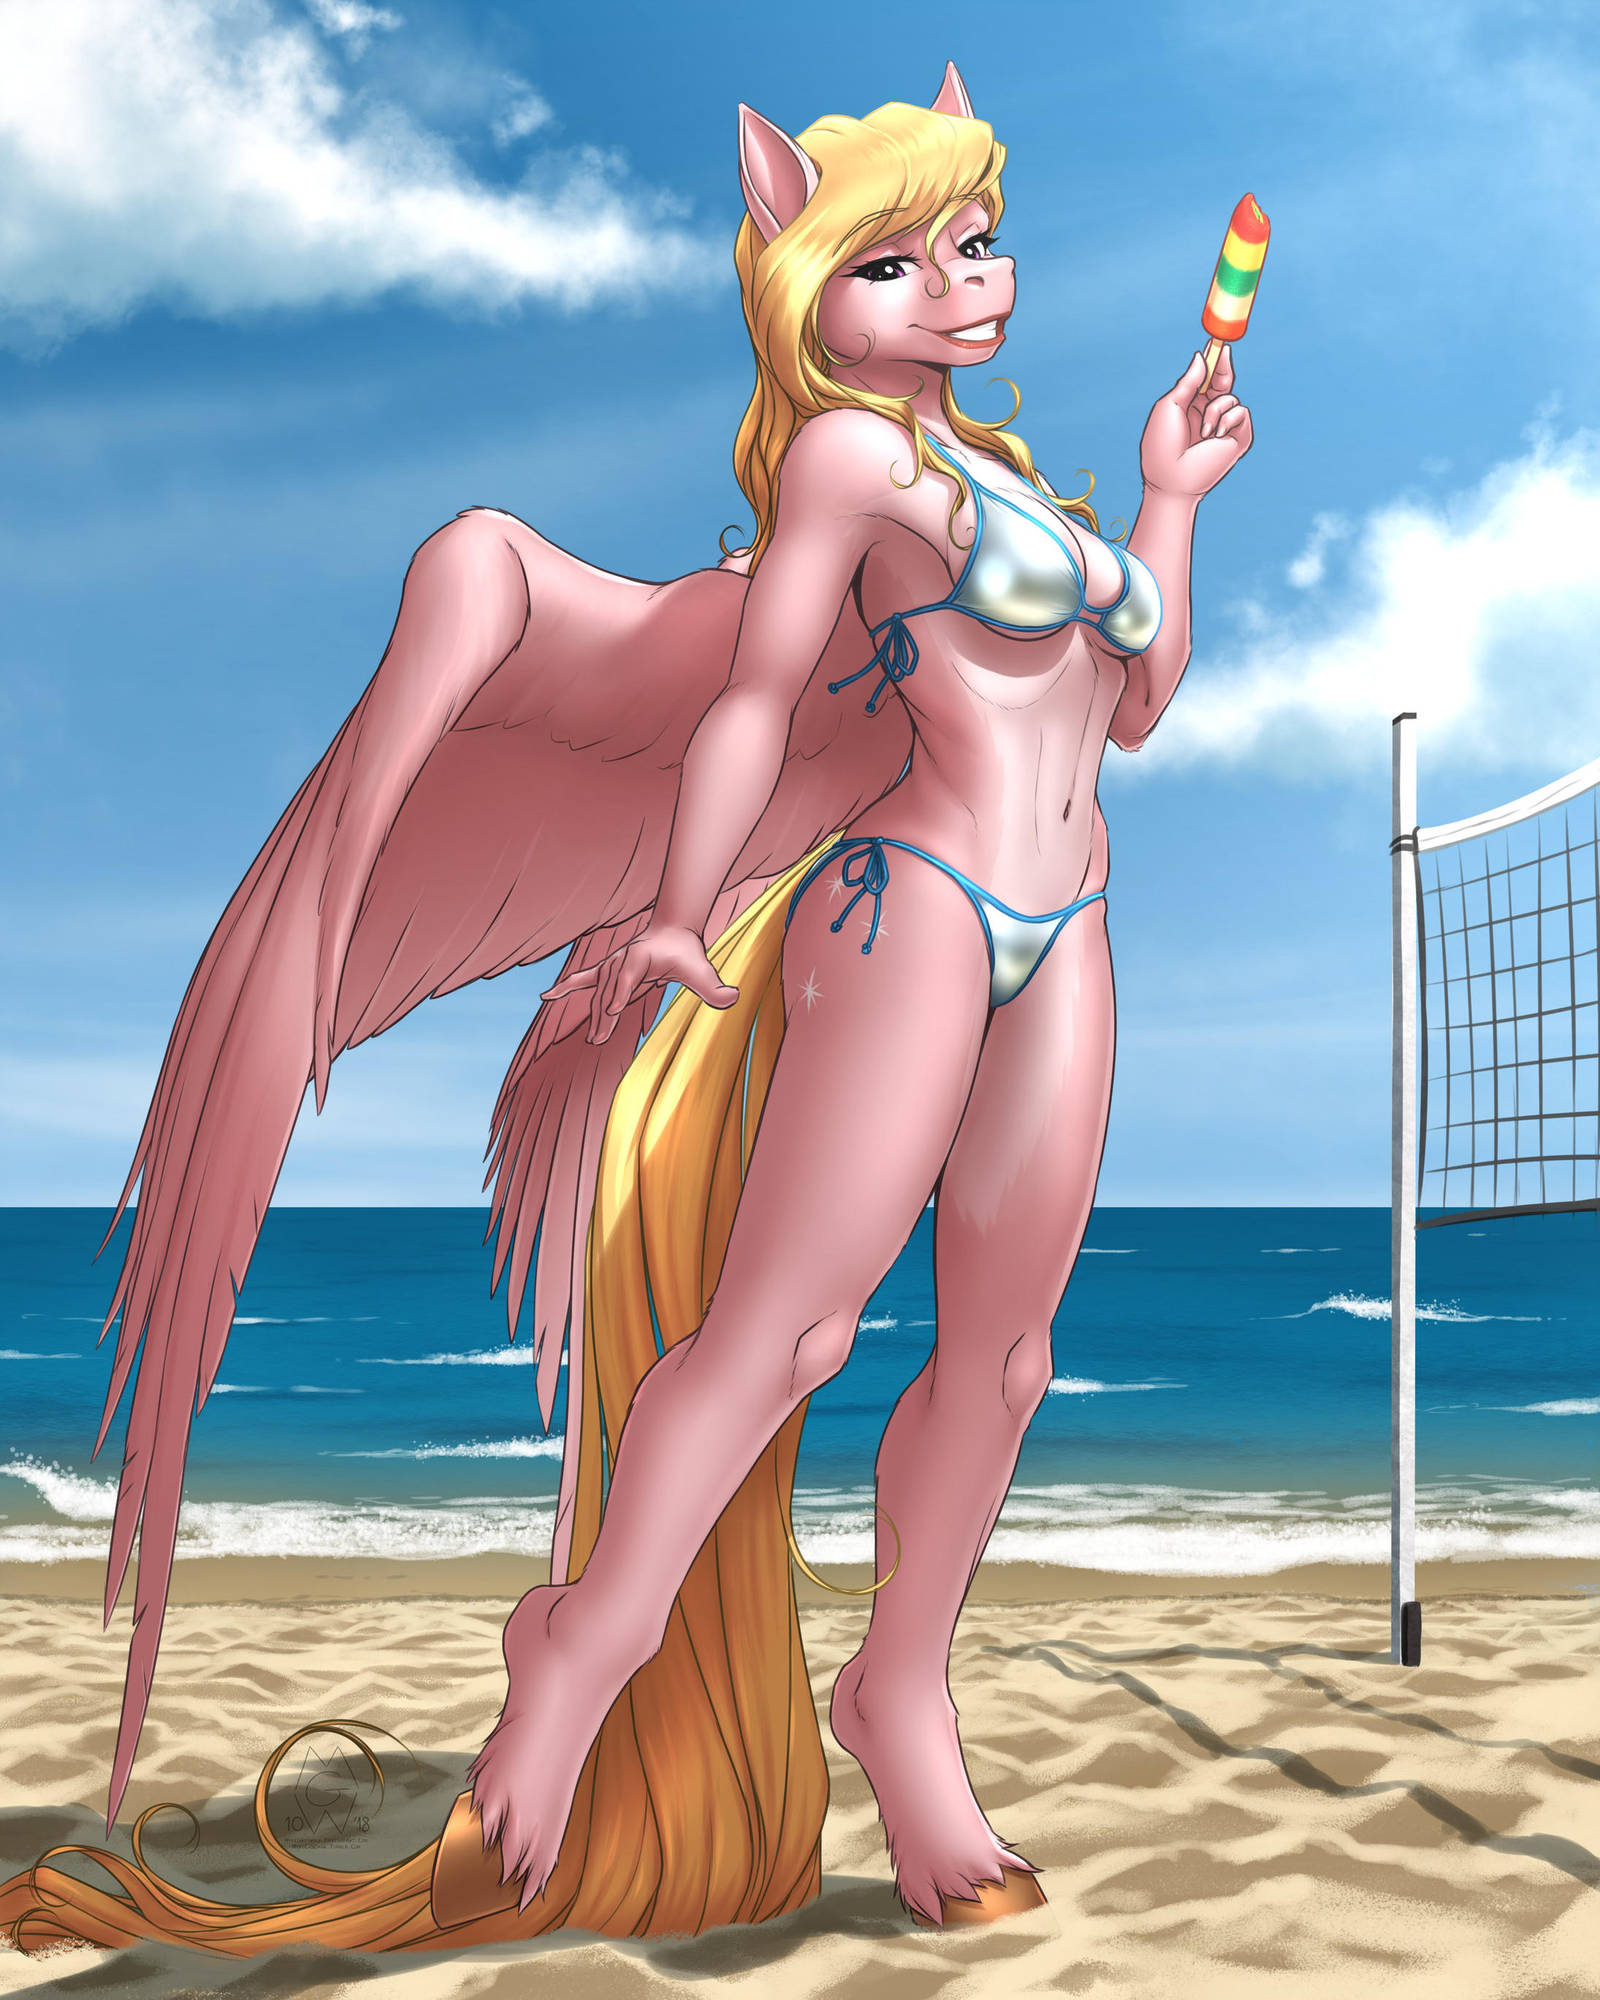 commission__vee_s_beach_stroll_by_mykegreywolf_dcqqy7h-fullview.jpg